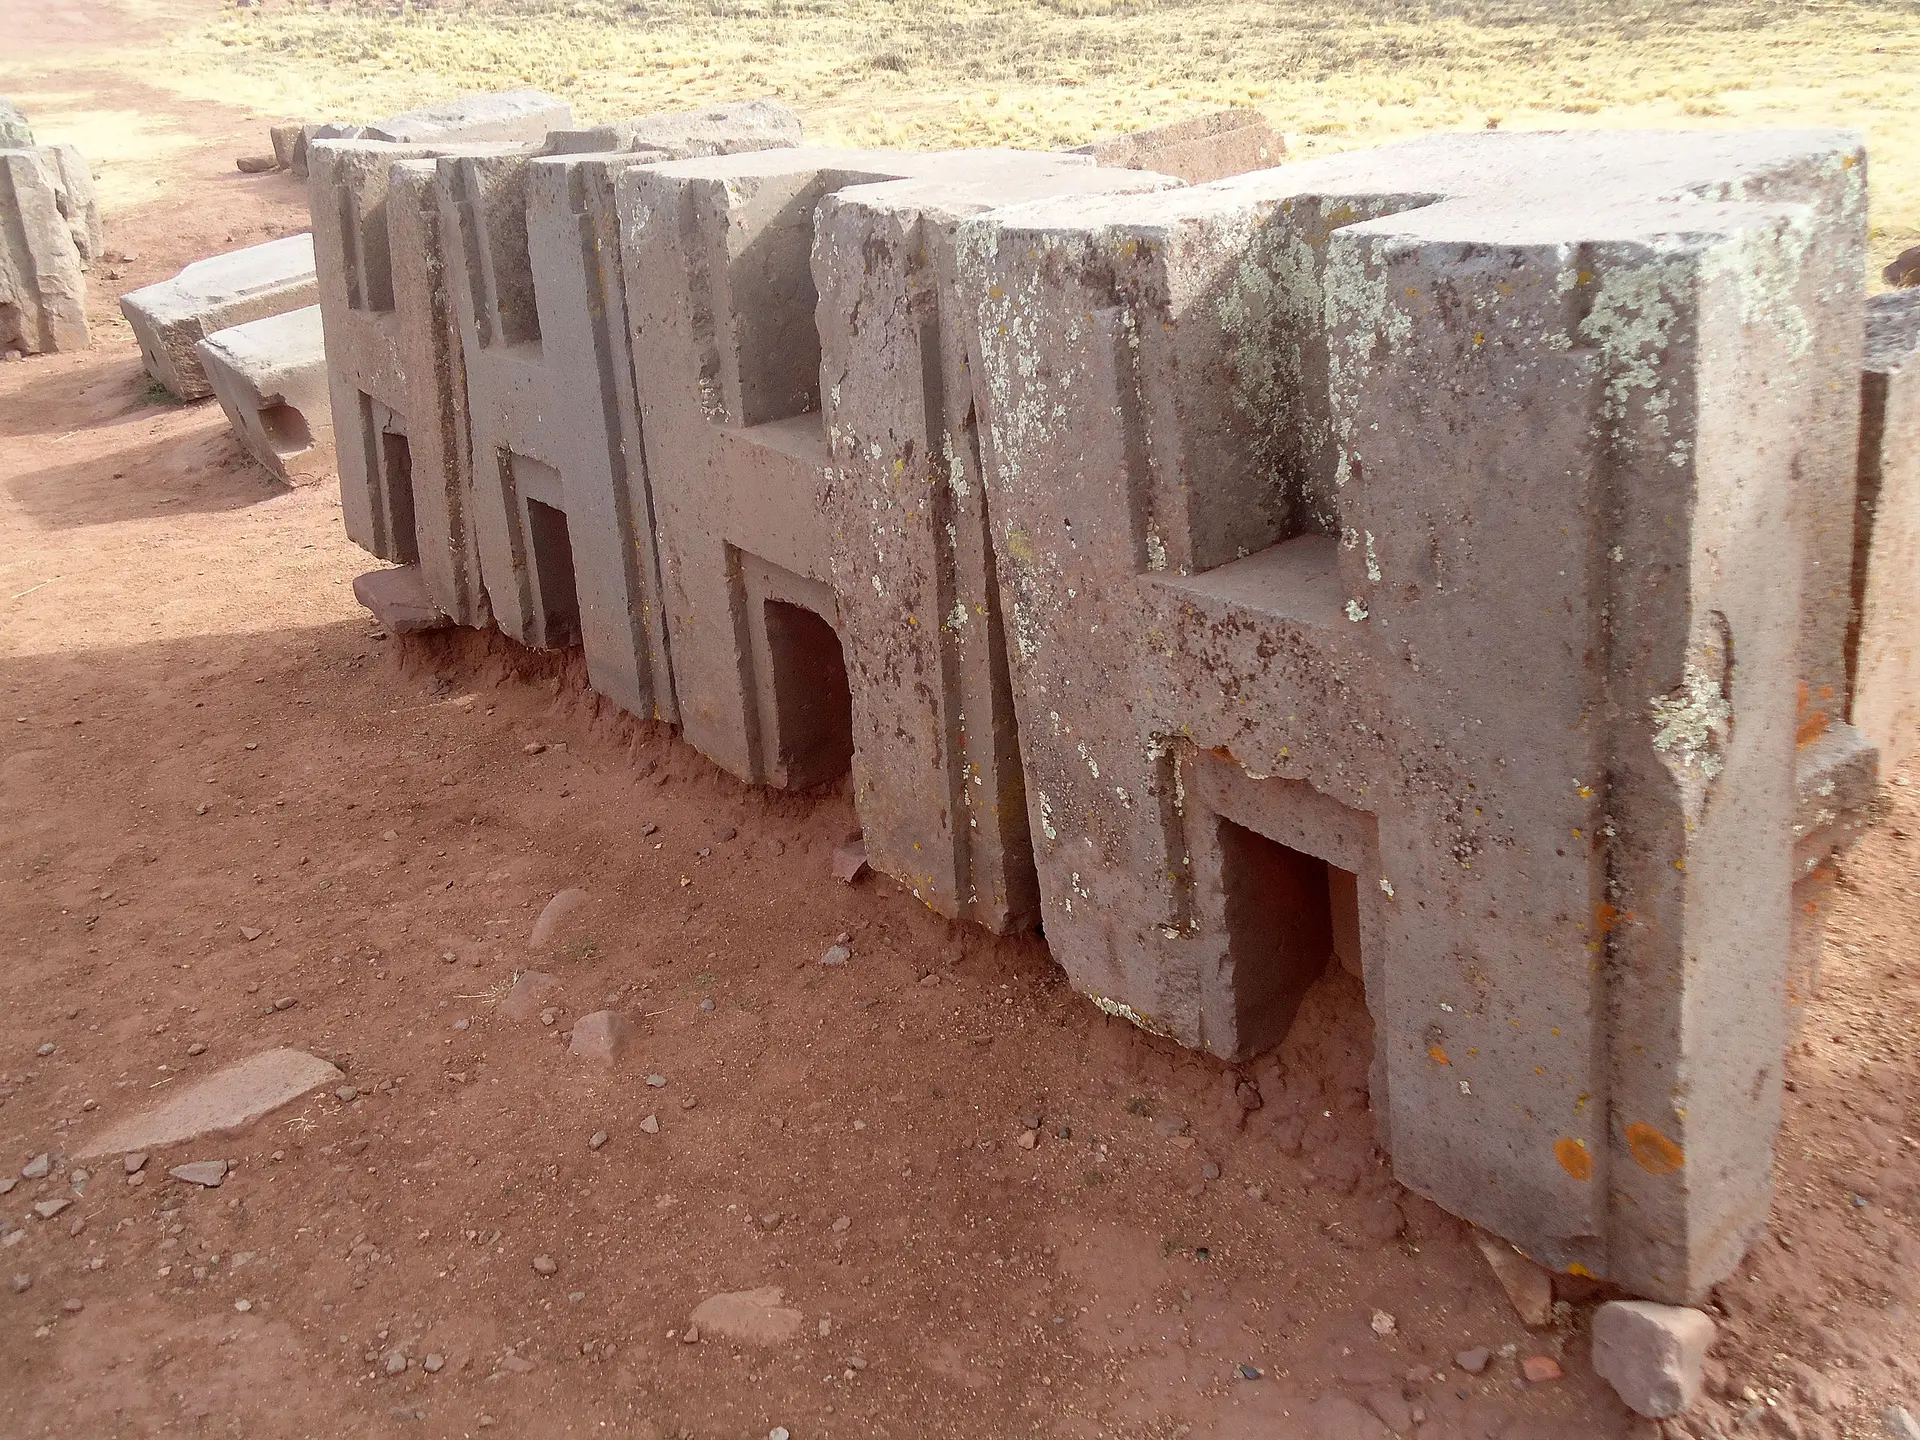 H block at Puma Punku, showcasing the precision of ancient engineering and mystery.